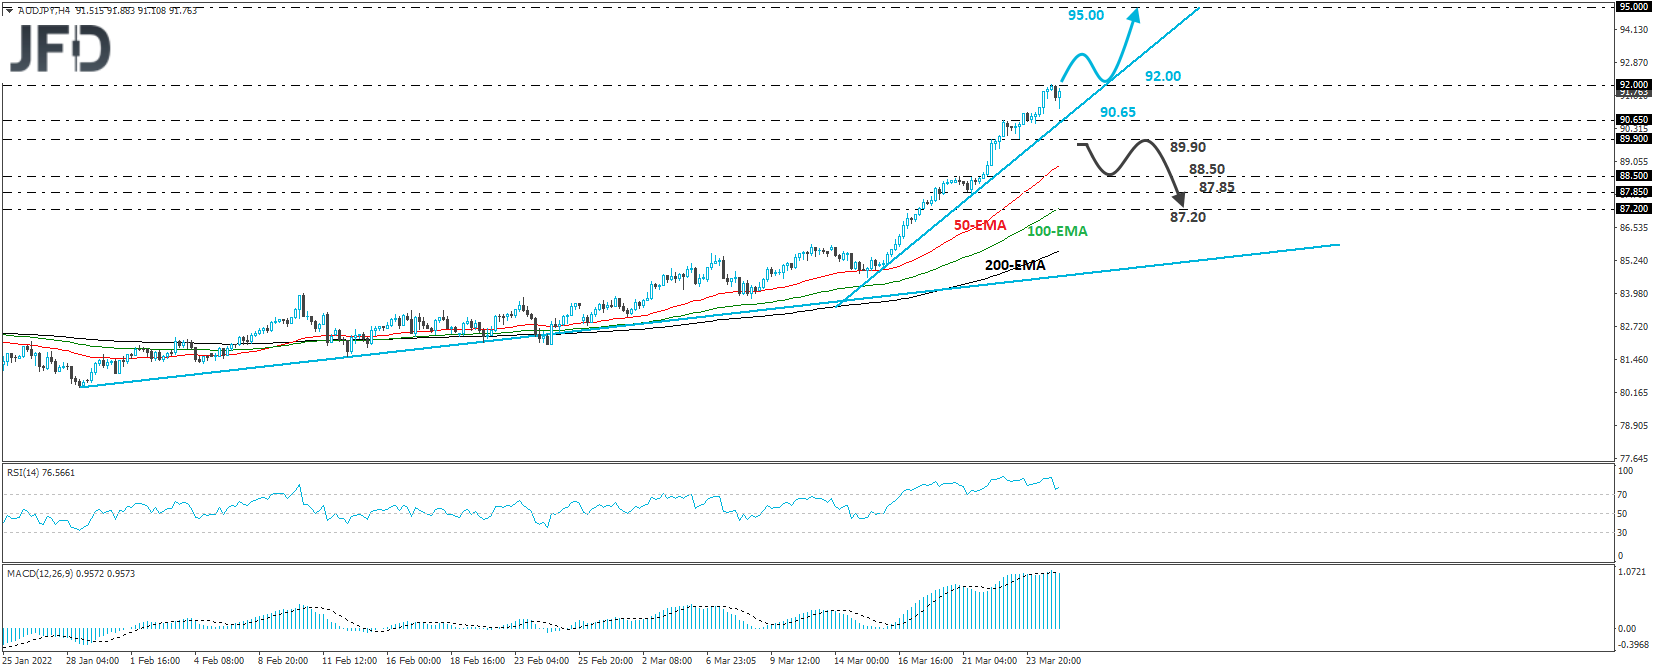 Technical analysis of the AUD/JPY 4 hour chart.